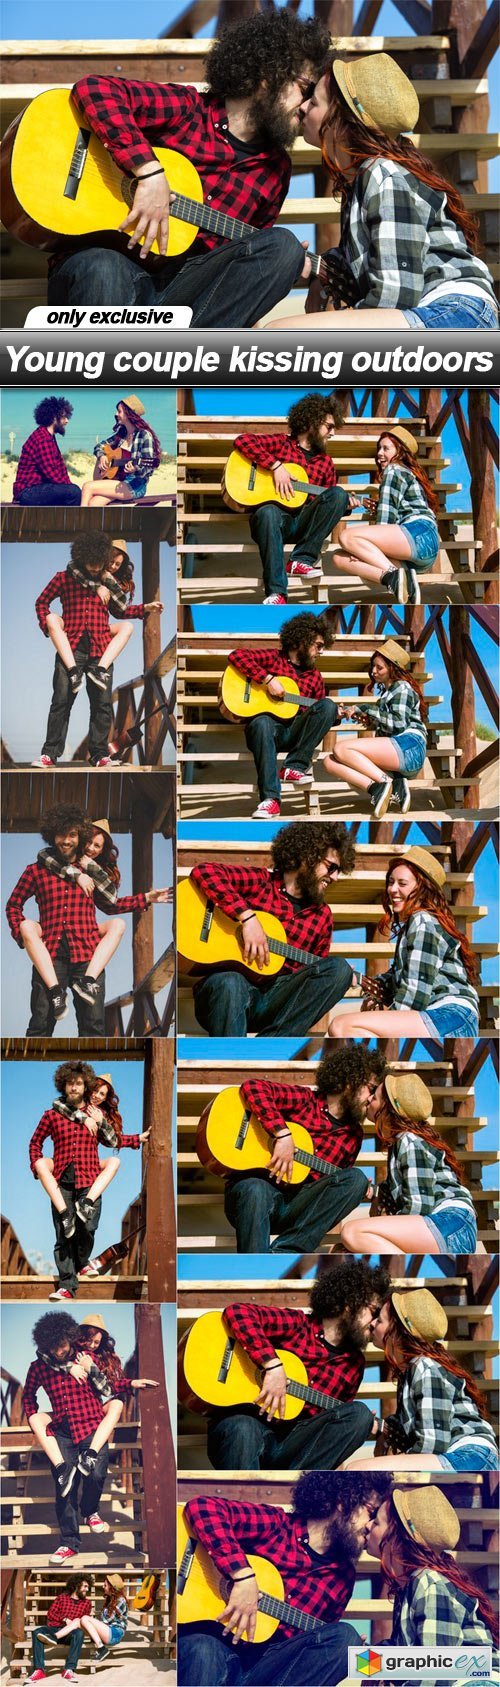 Young couple kissing outdoors - 12 UHQ JPEG